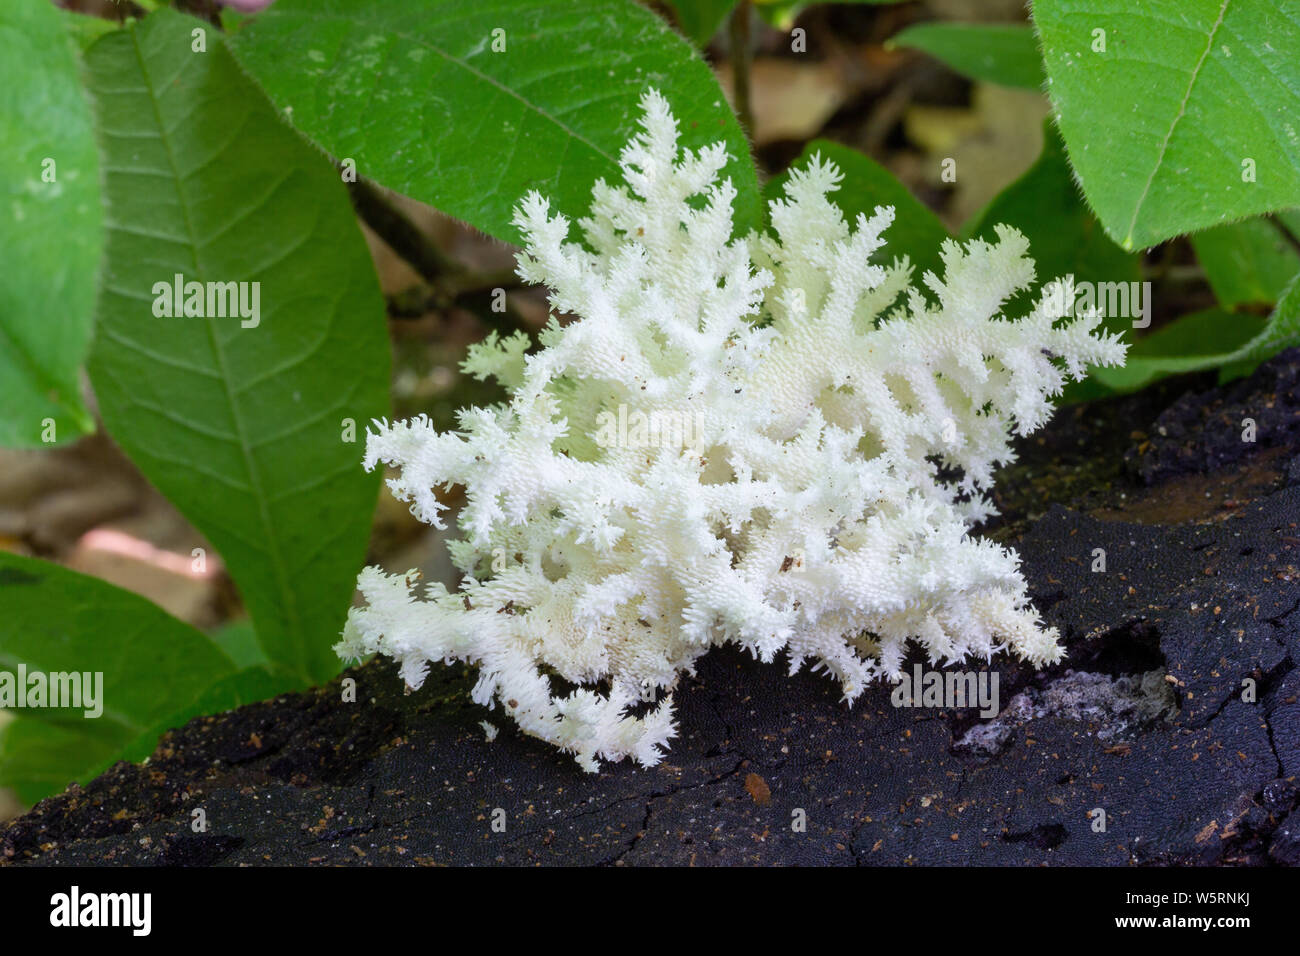 white edible mushroom genus Hericium (Herícium coralloídes) on an old rotting tree in a summer forest Stock Photo